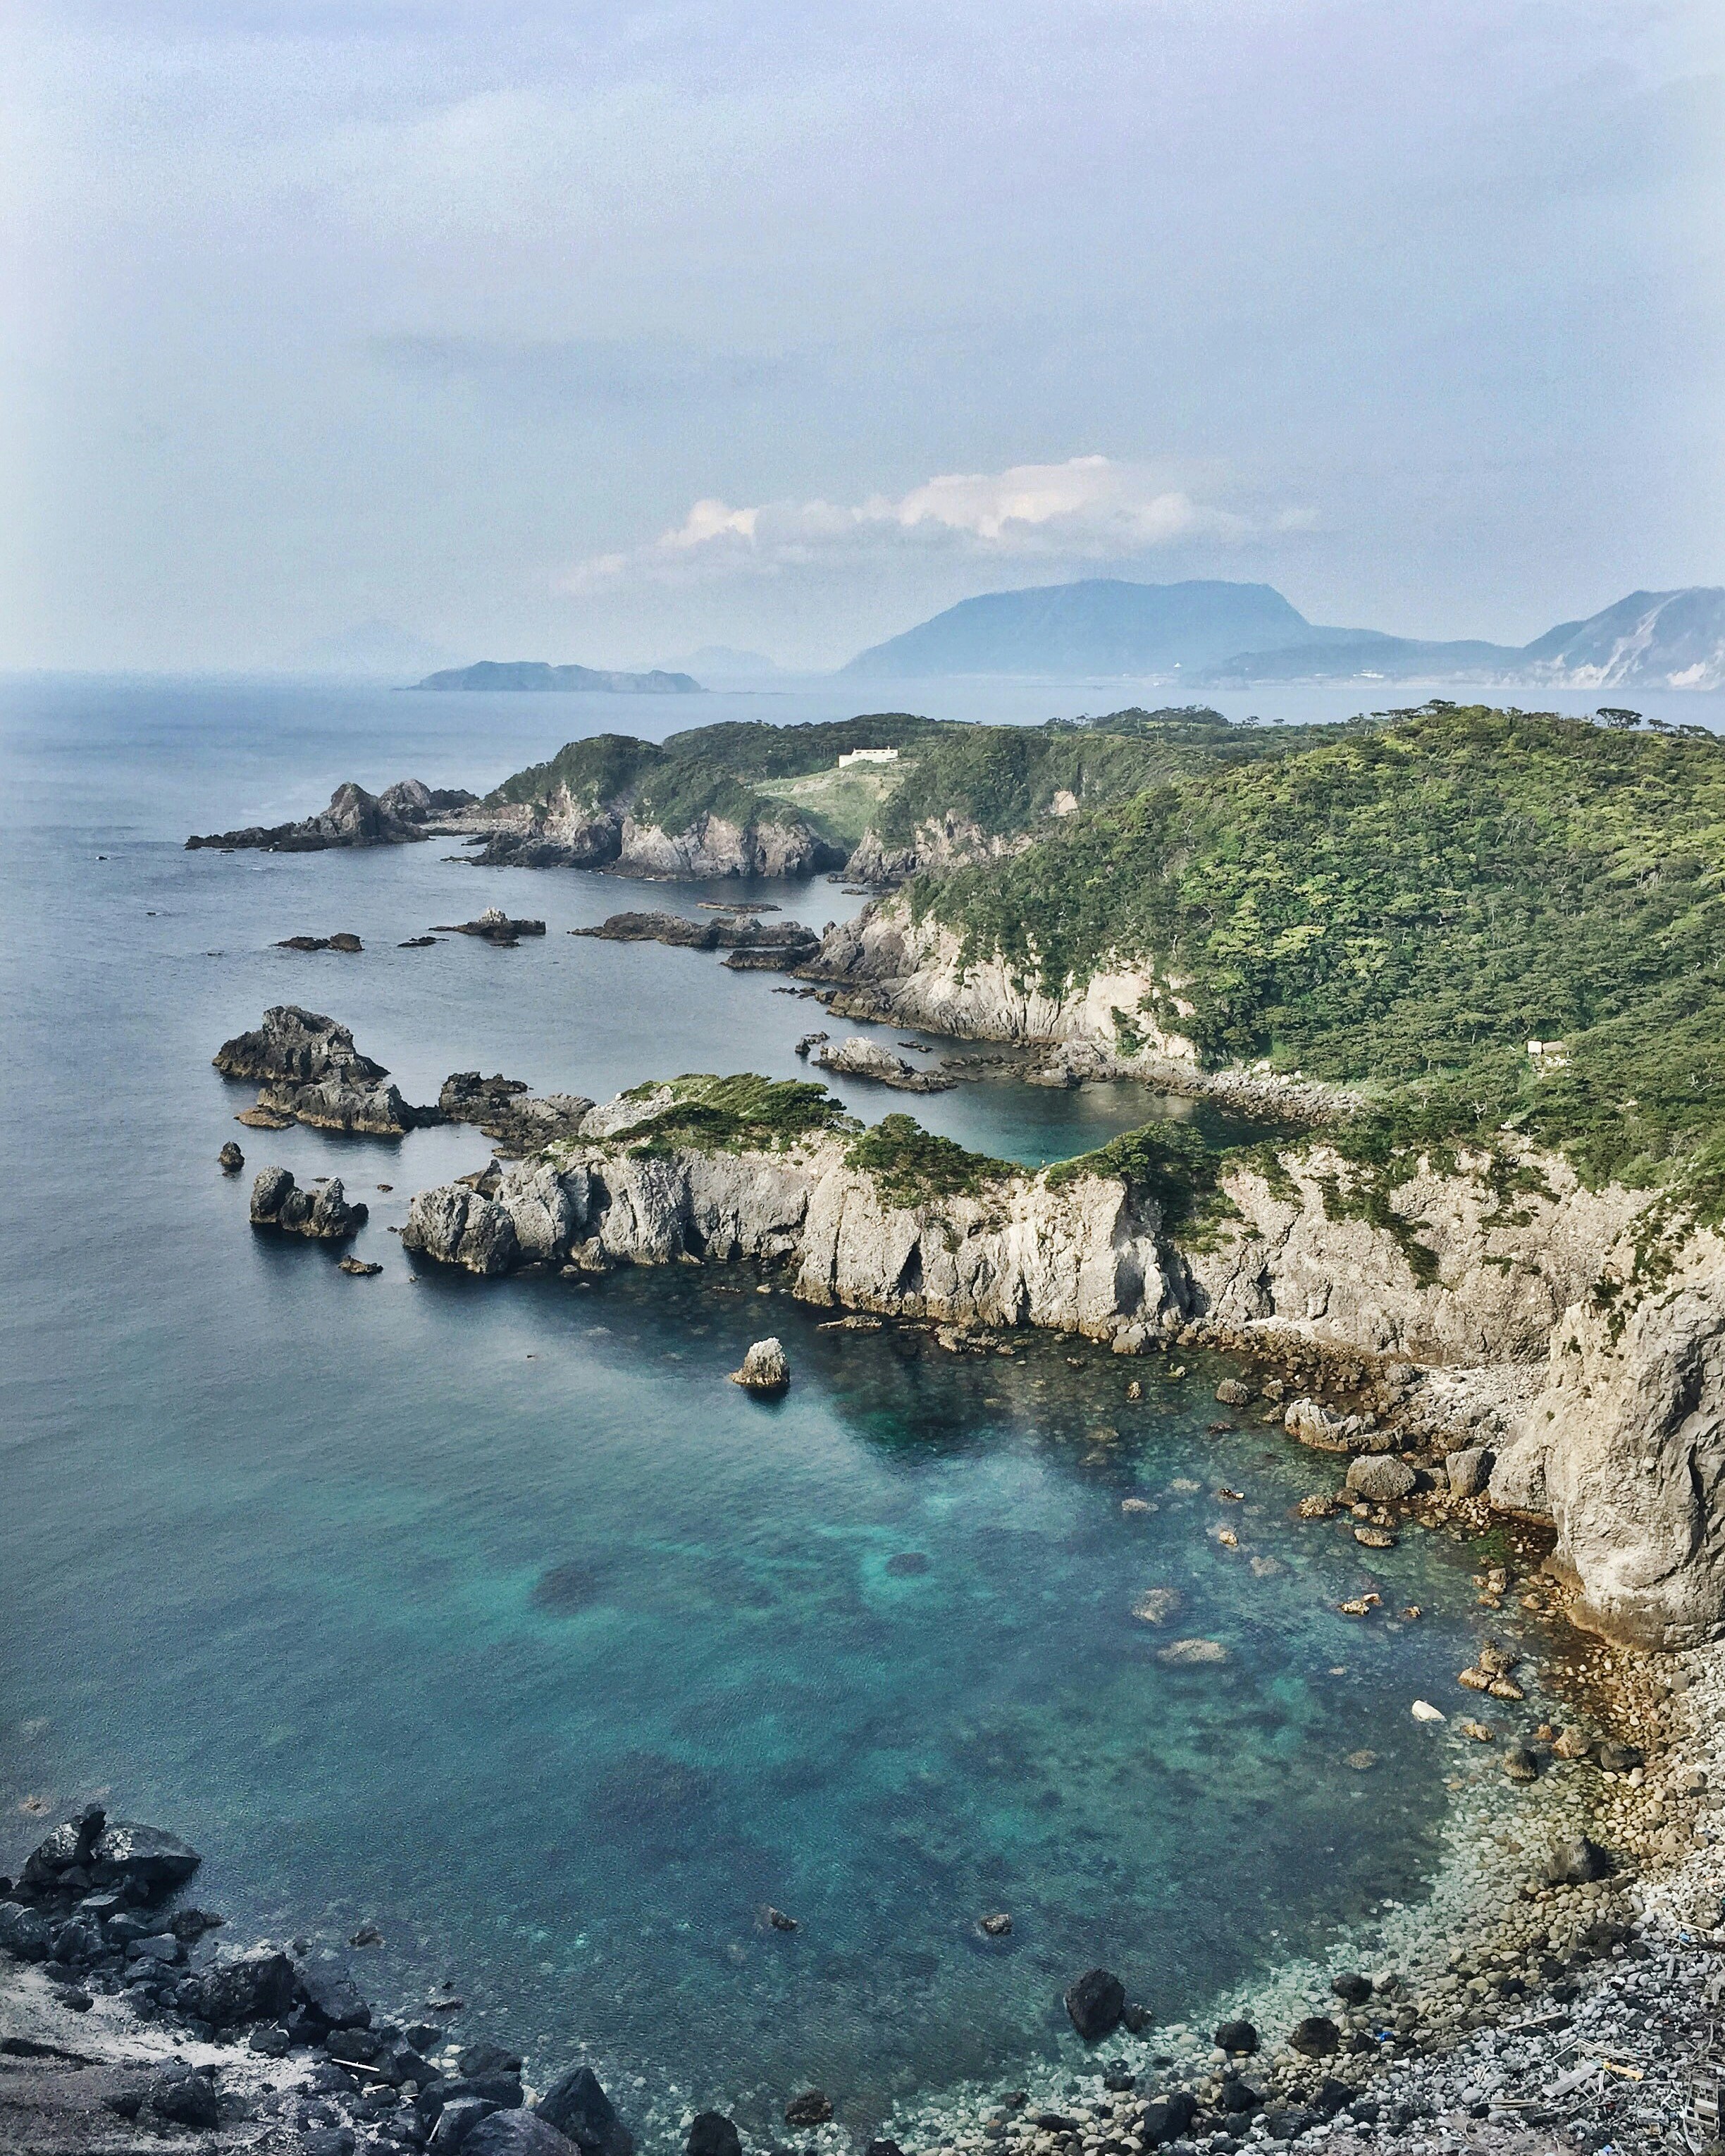 This was taken from a lookout on Kozushima island administrated as a part of Tokyo. We hiked up the trail and got to see this amazing view! Worth checking out if you’ve got a chance to go there.